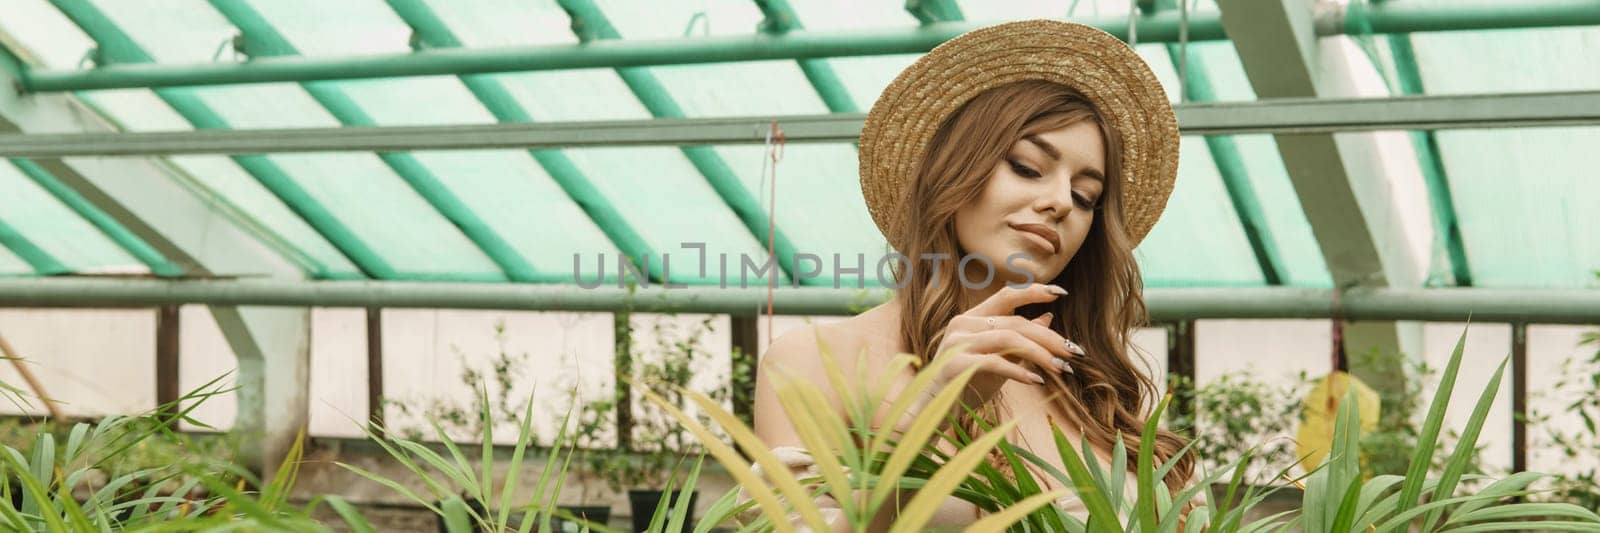 A beautiful young woman takes care of plants in a greenhouse. The concept of gardening and an eco-friendly lifestyle. by Annu1tochka